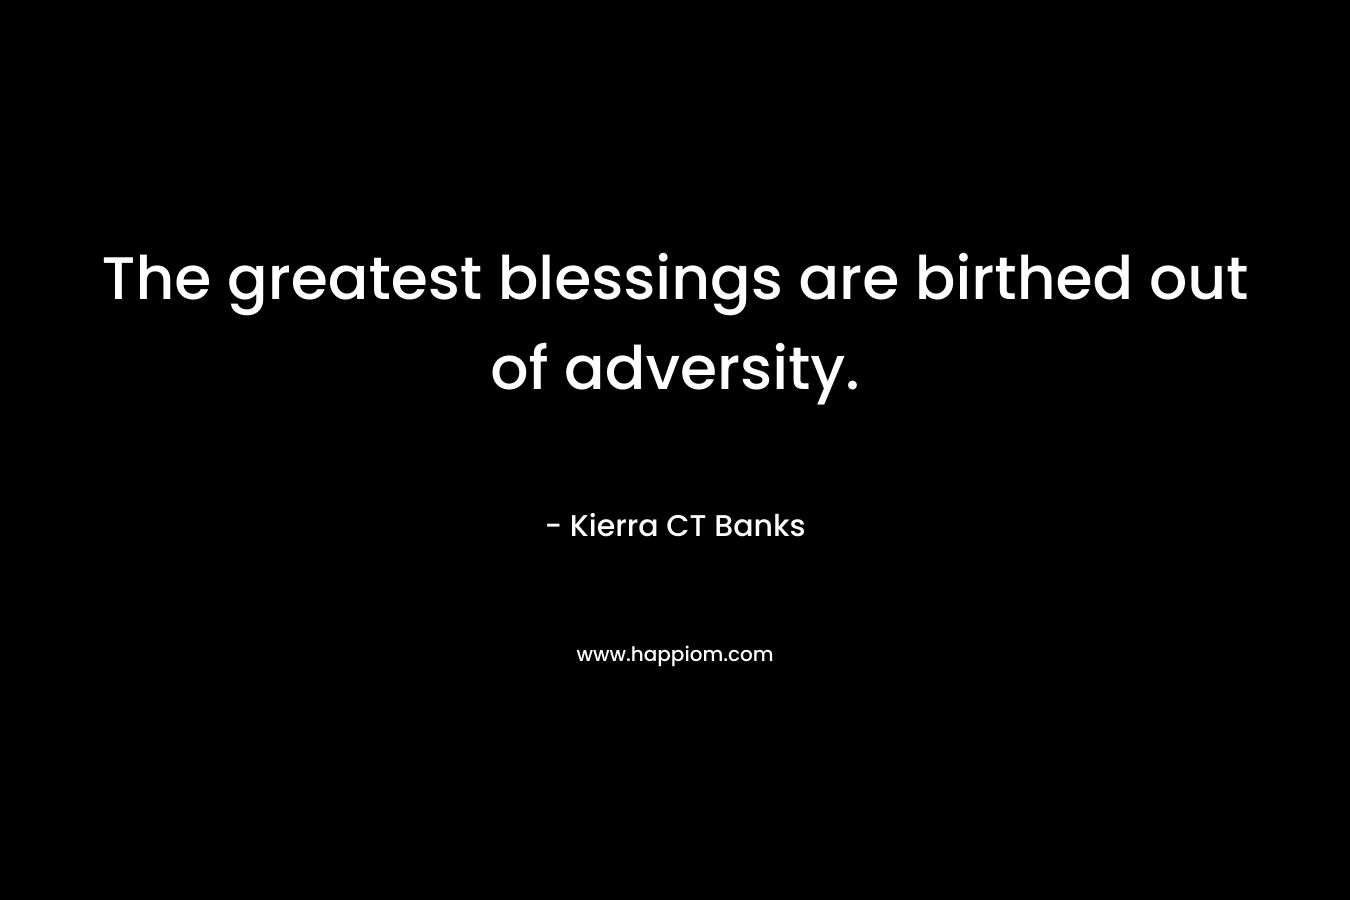 The greatest blessings are birthed out of adversity. – Kierra CT Banks